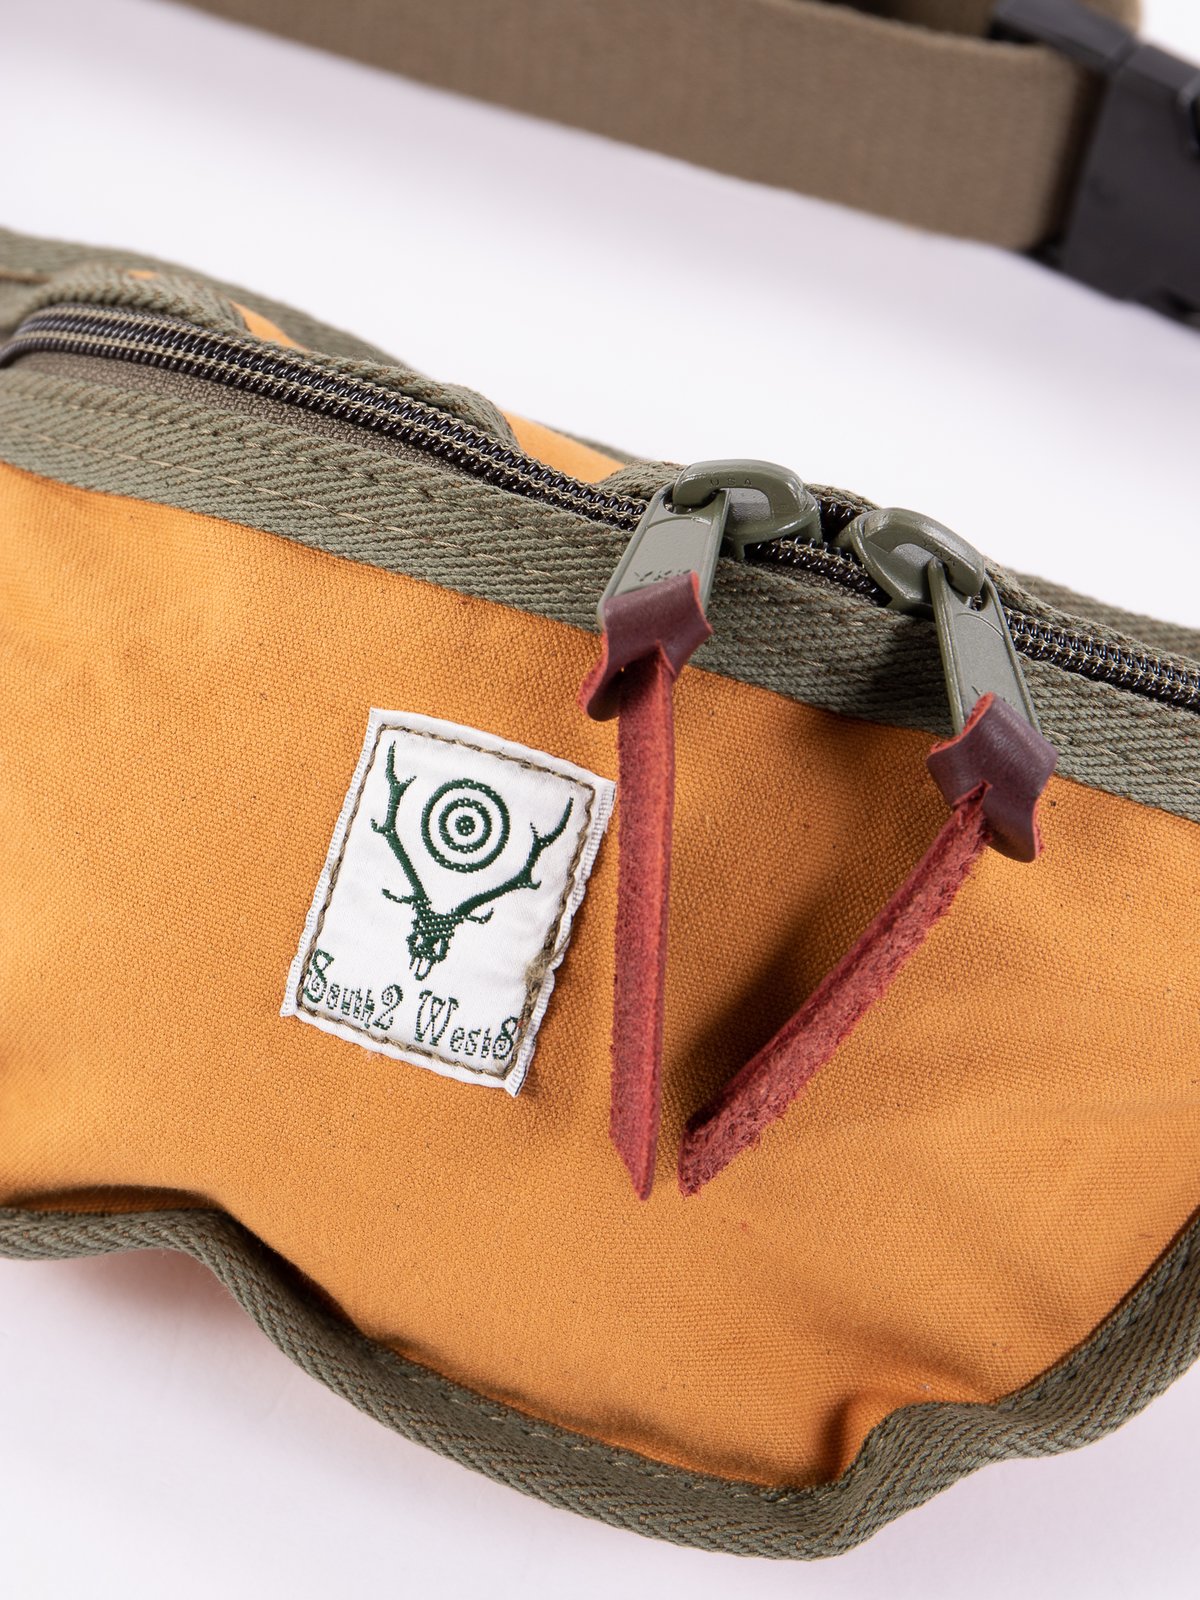 Sunforger Small Fanny Pack by South2 West8 – The Bureau Belfast 